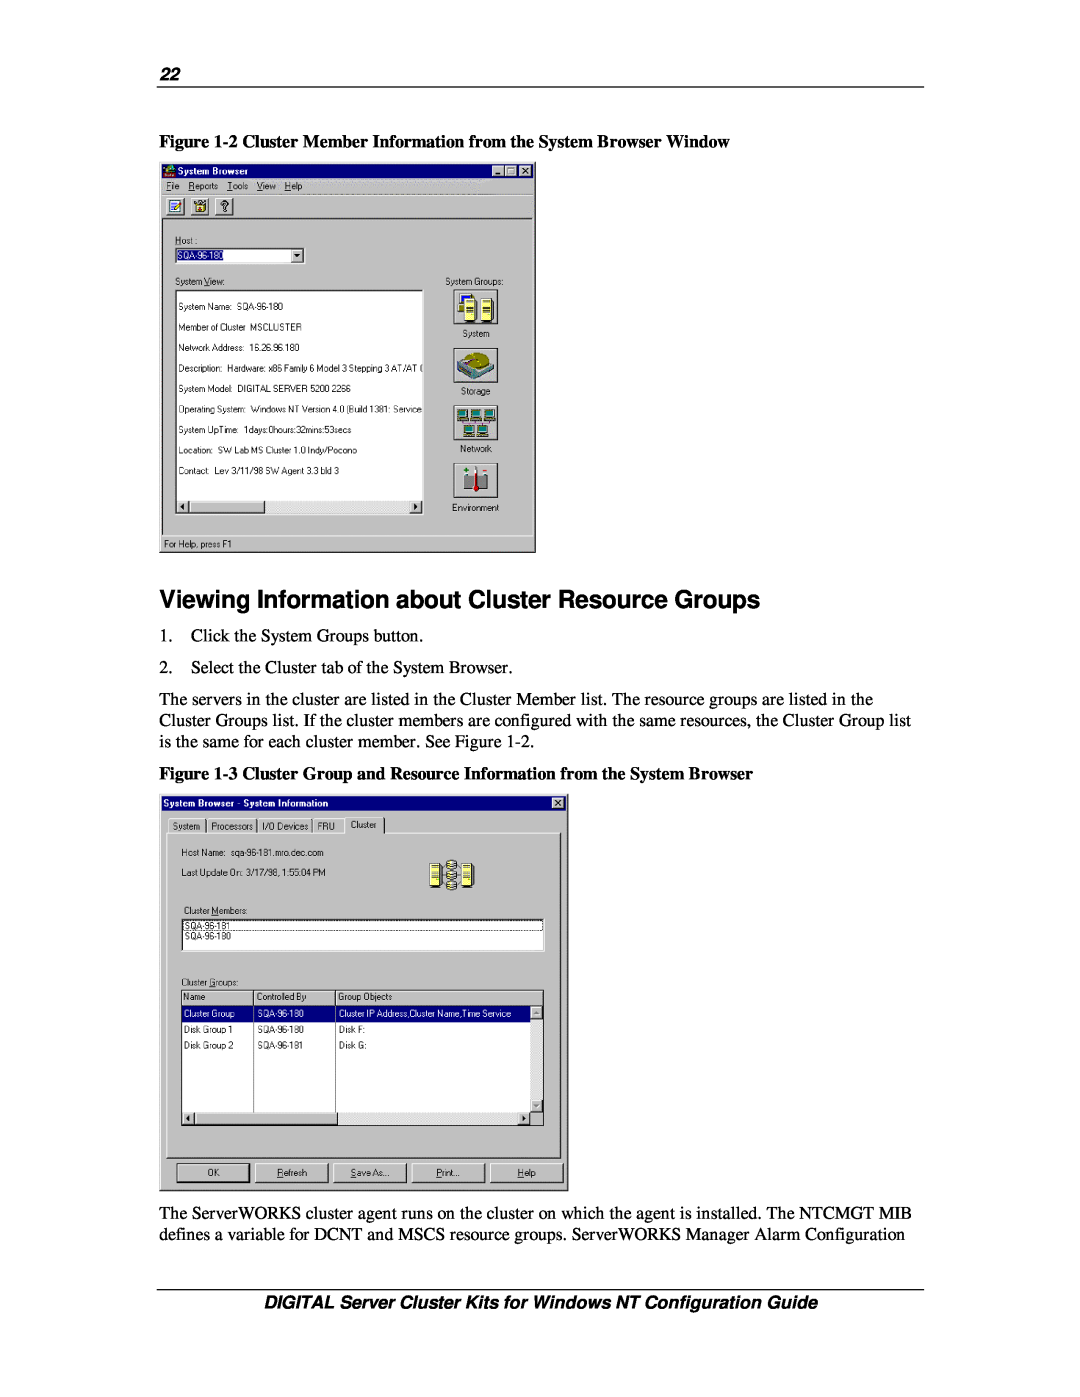 Compaq DIGITAL Server Cluster Kits for Windows NT manual Viewing Information about Cluster Resource Groups 